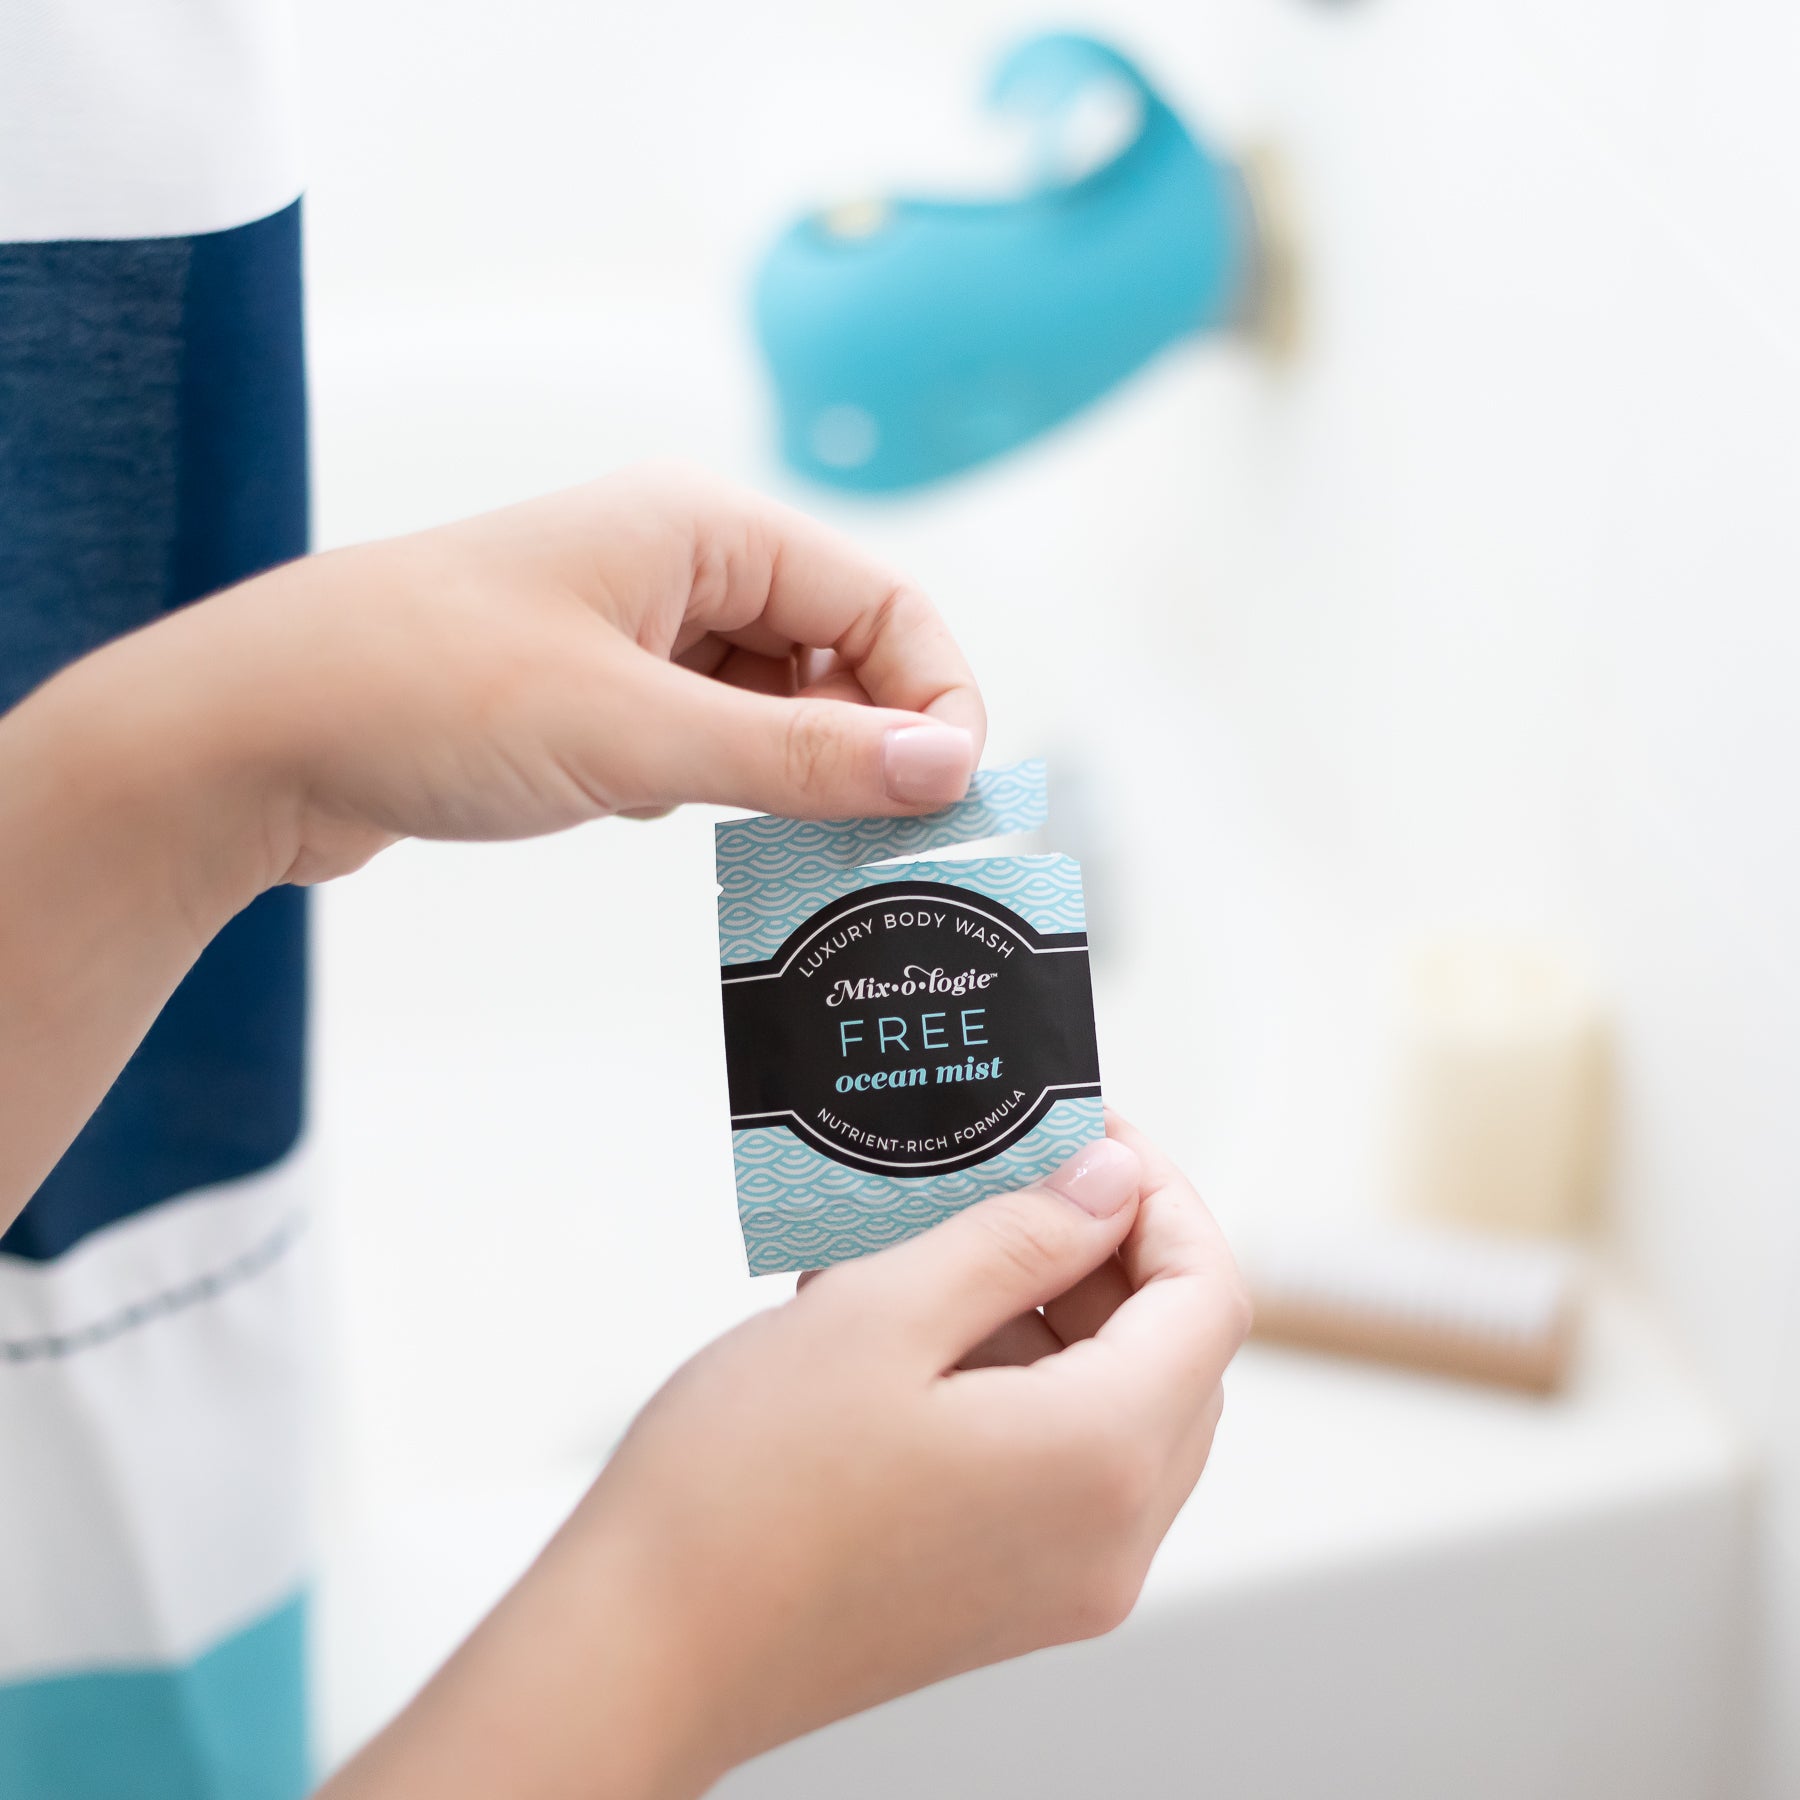 Luxury Body Wash Sample of Free (Ocean Mist) in light blue pattern with black label being modeled into hand with bathtub in background